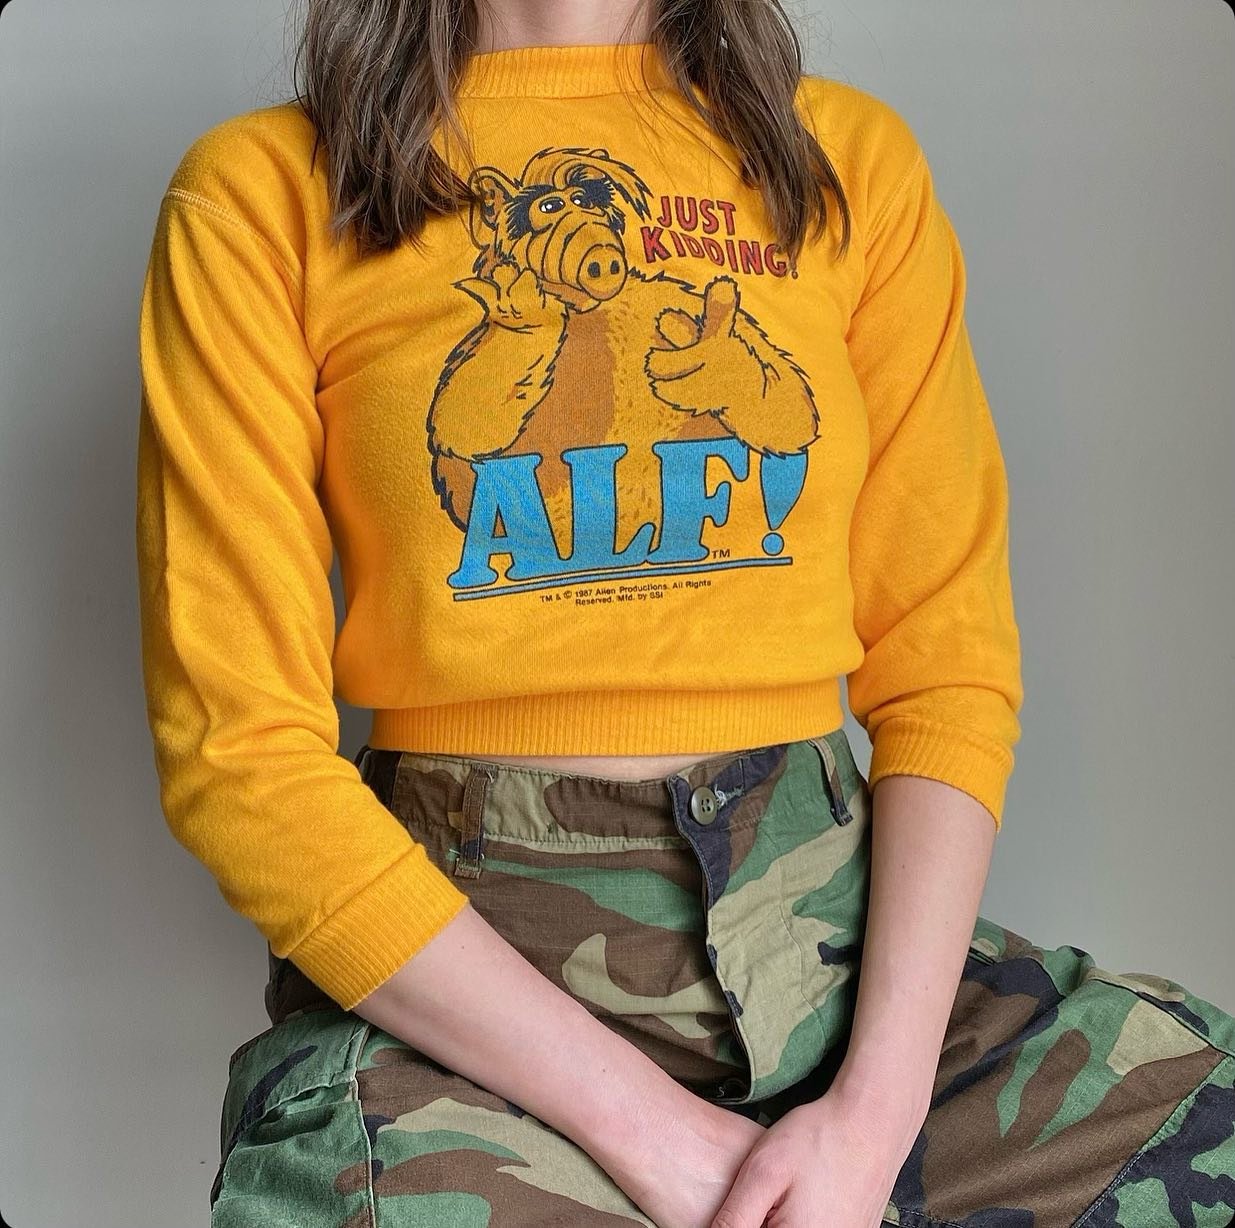 🧡OPEN TODAY 12-6🧡
Come visit Kate &amp; Ang! 
Alf pullover- XS, camo cargos- 28&rdquo; waist - both in store!
#baltimorevintage #milkandice #alf #hamiltonlauravillemainstreet